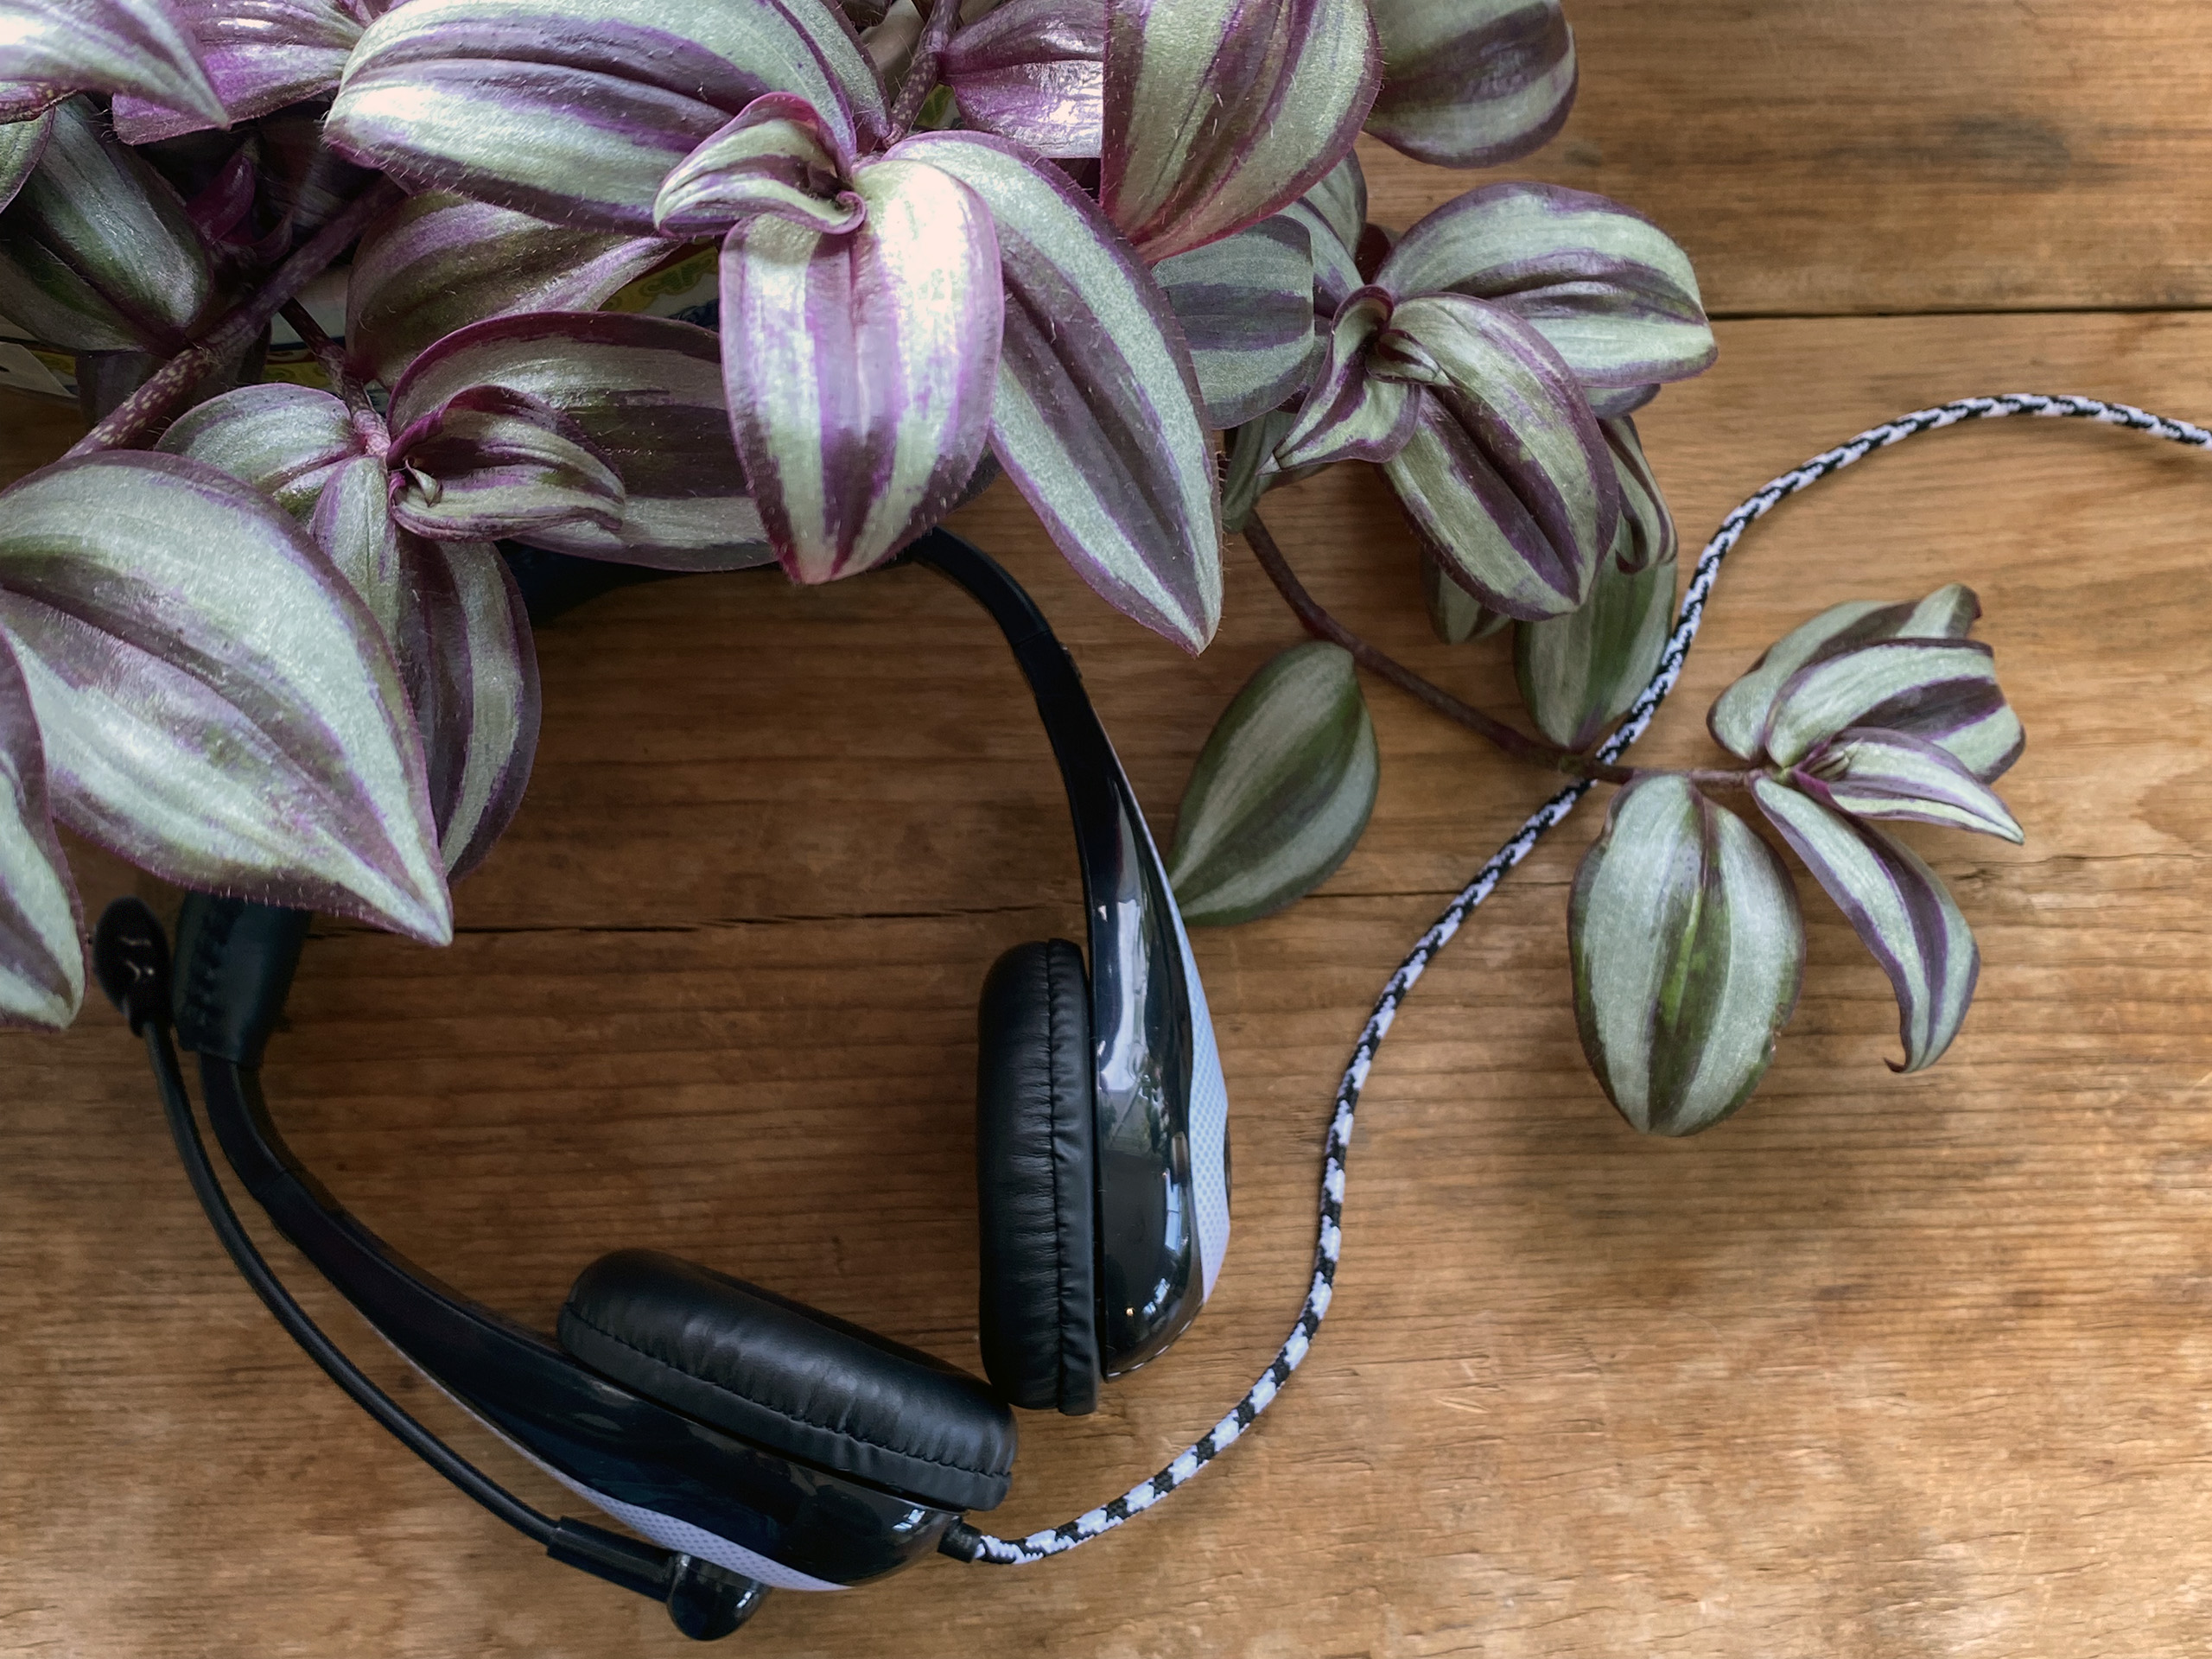 AVID AE-36 headset with plant